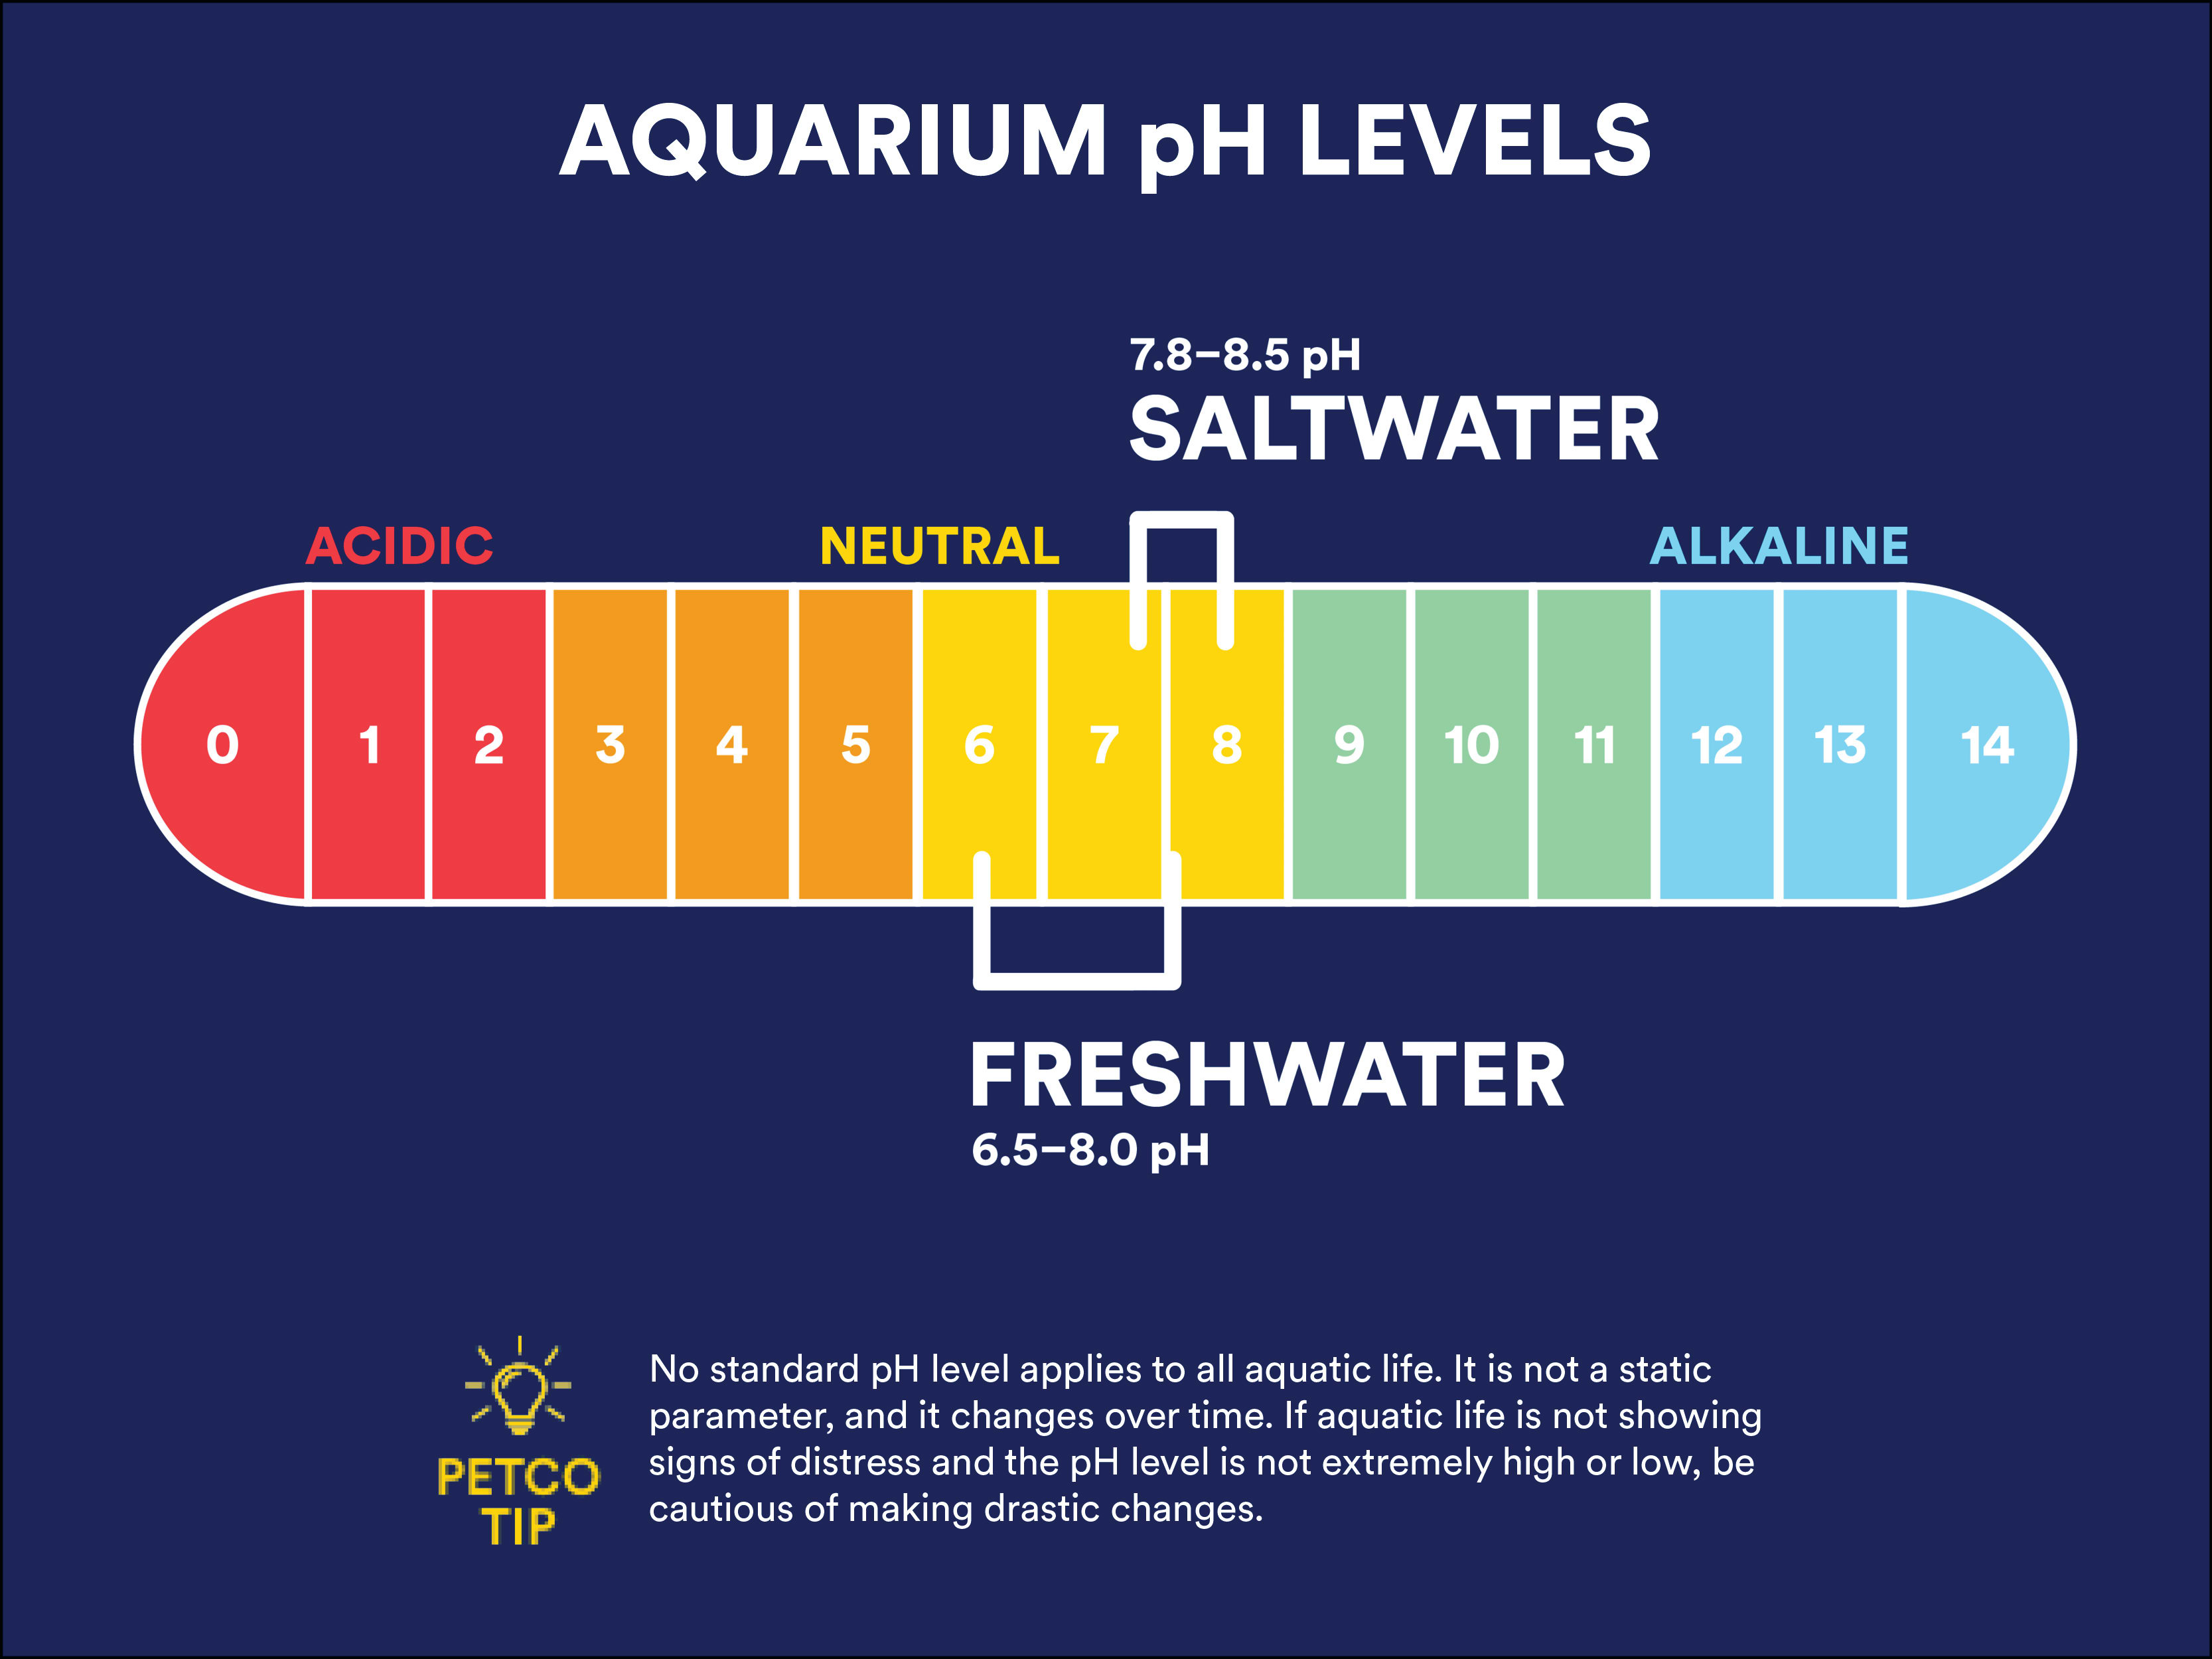 Recommended Salwater and Freshwater Aquarium pH Levels